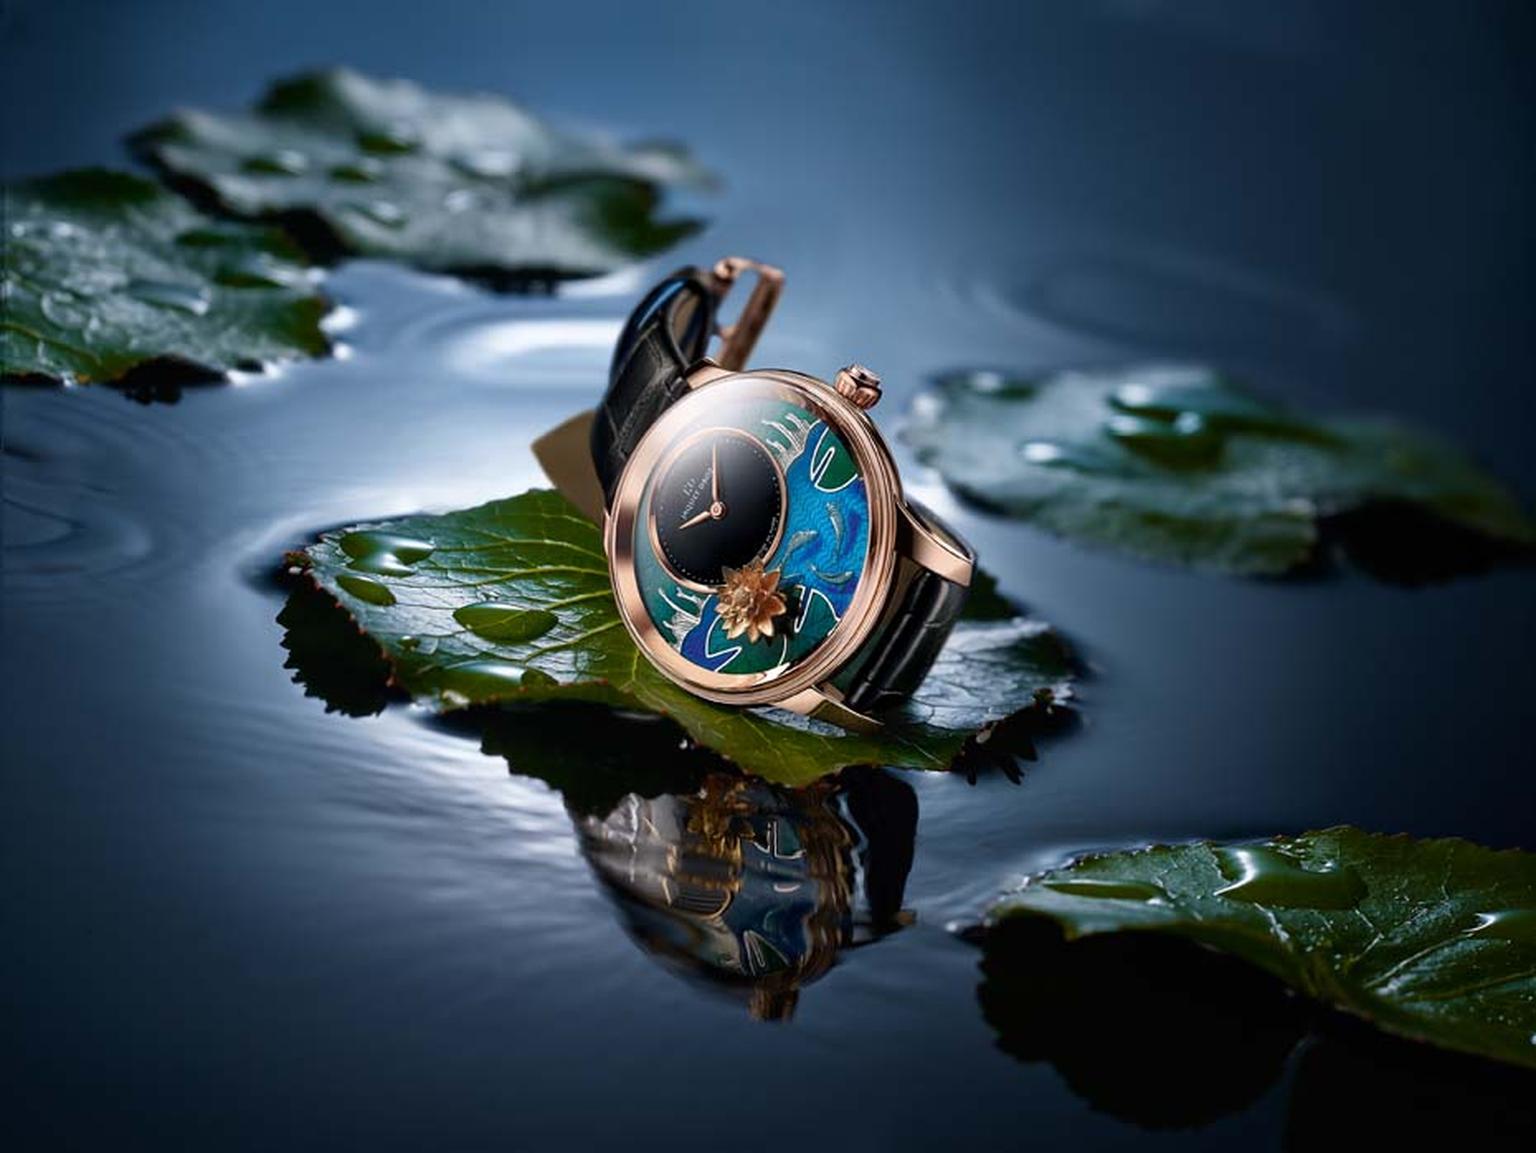 Butterfly and fish watches_Jaquet Droz_Petite Heure minute carps ambience.jpg